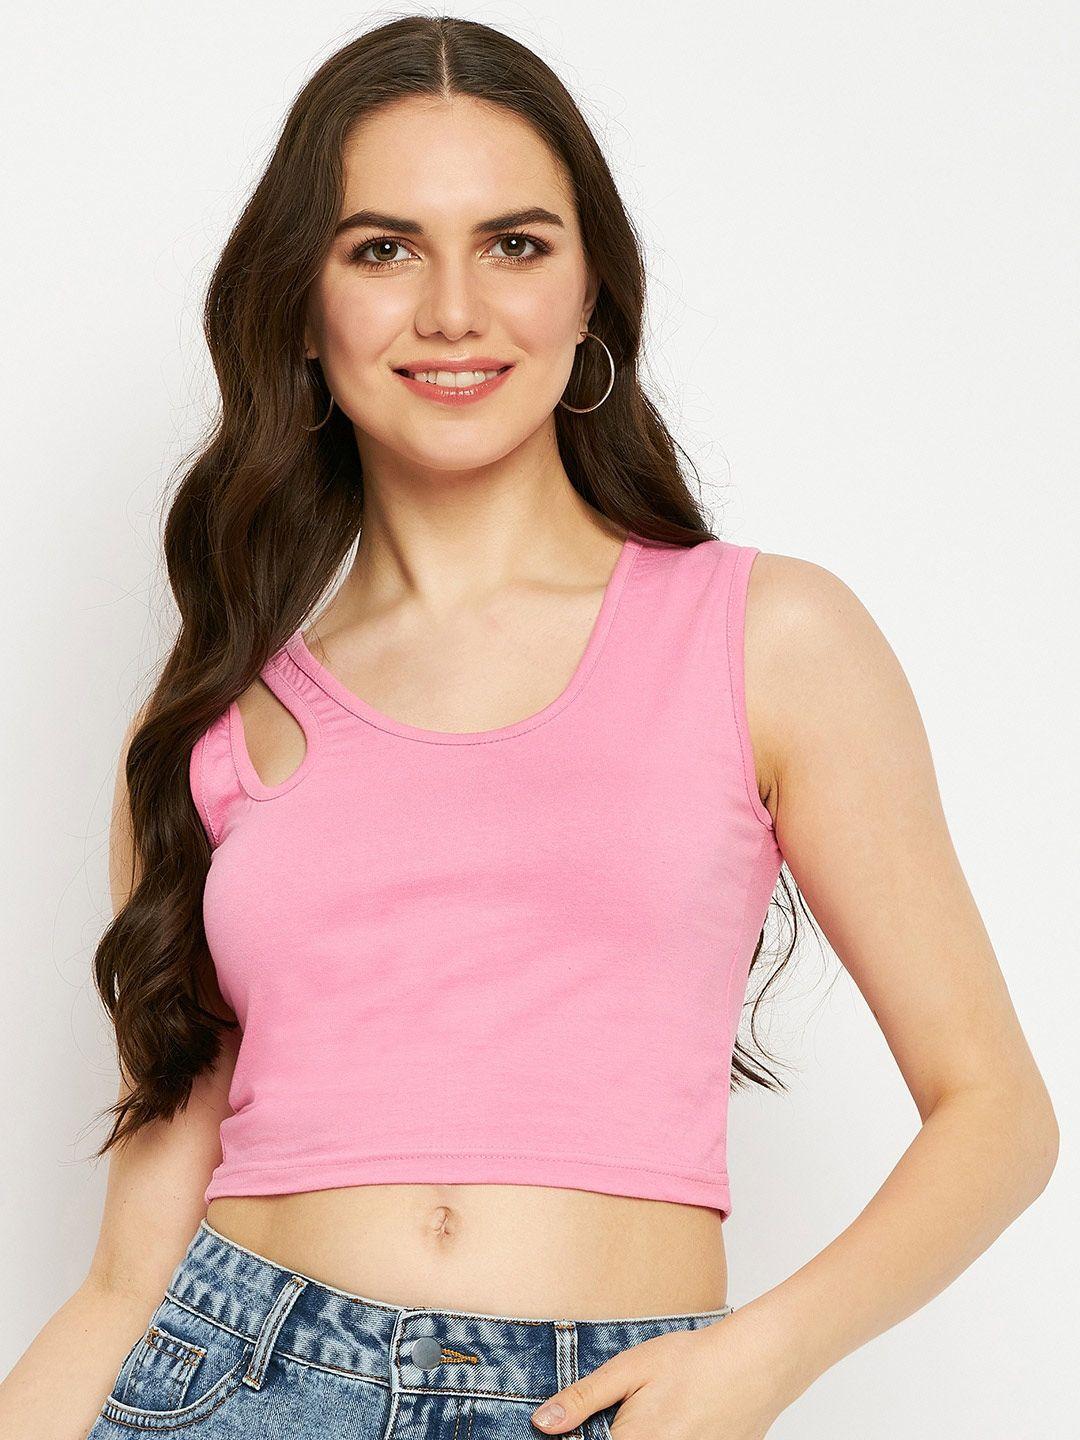 brinns round neck cut out fitted crop top